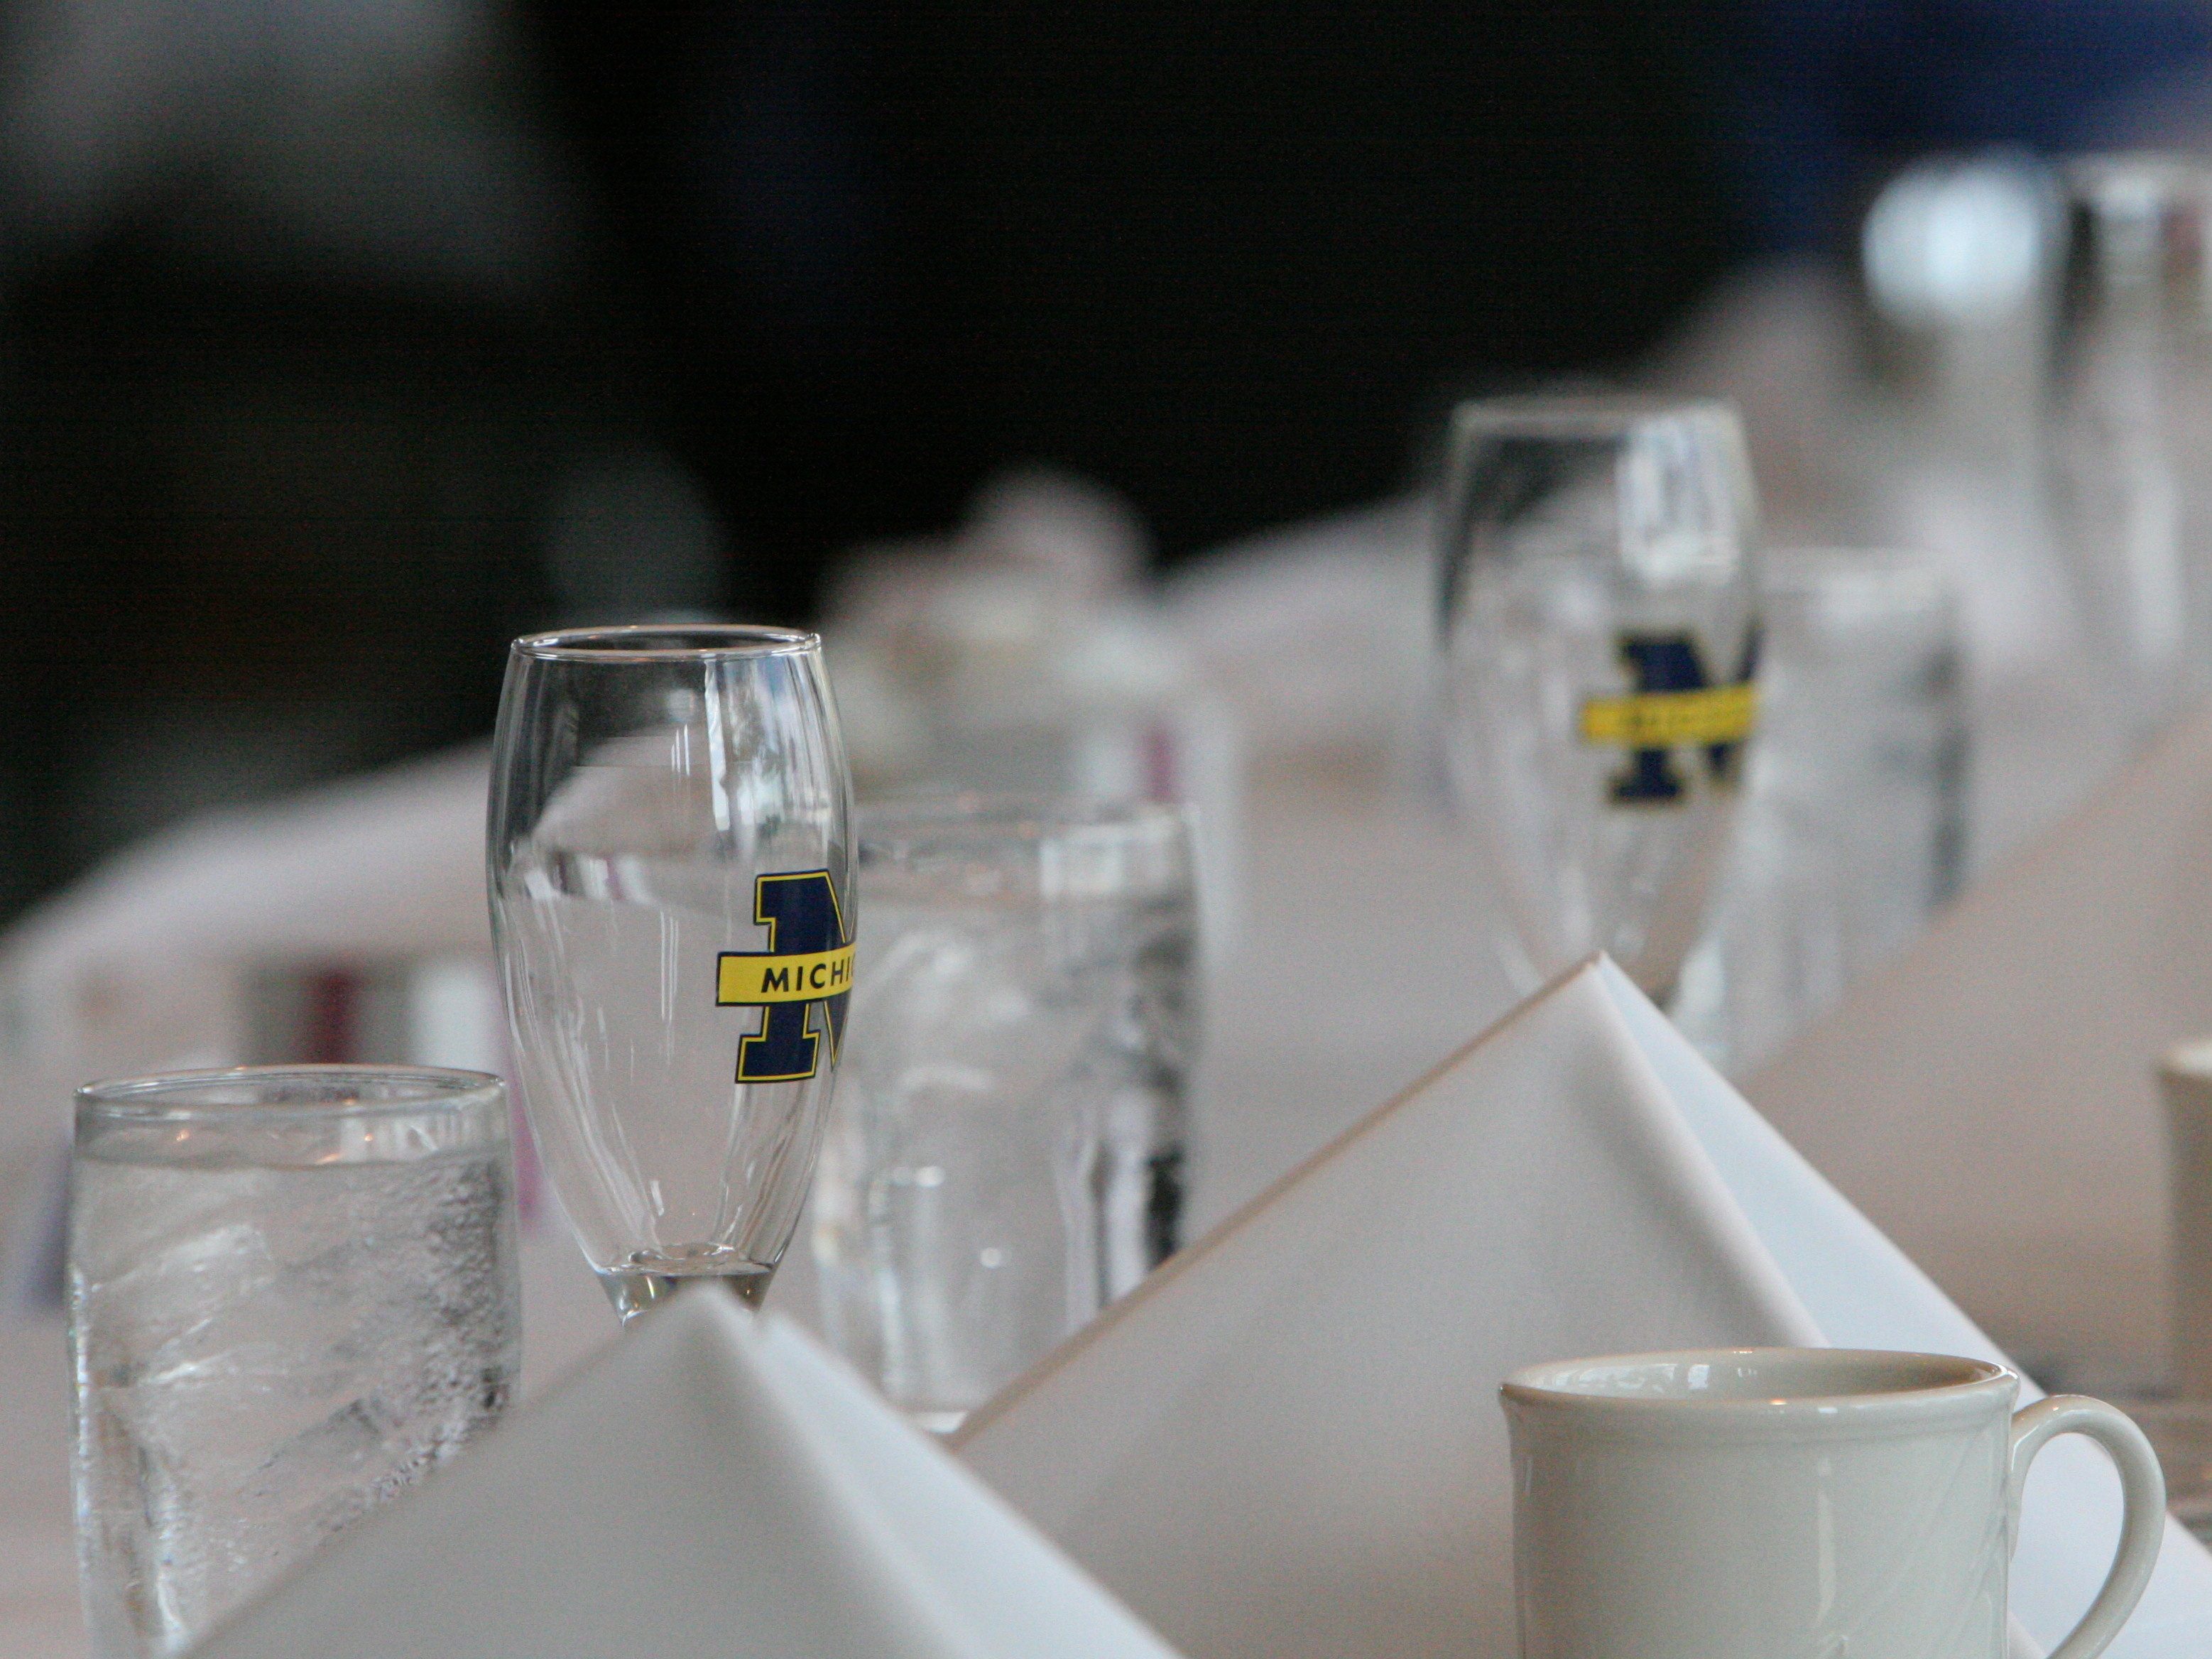 Champagne glasses and white napkins on a table with the block M logo